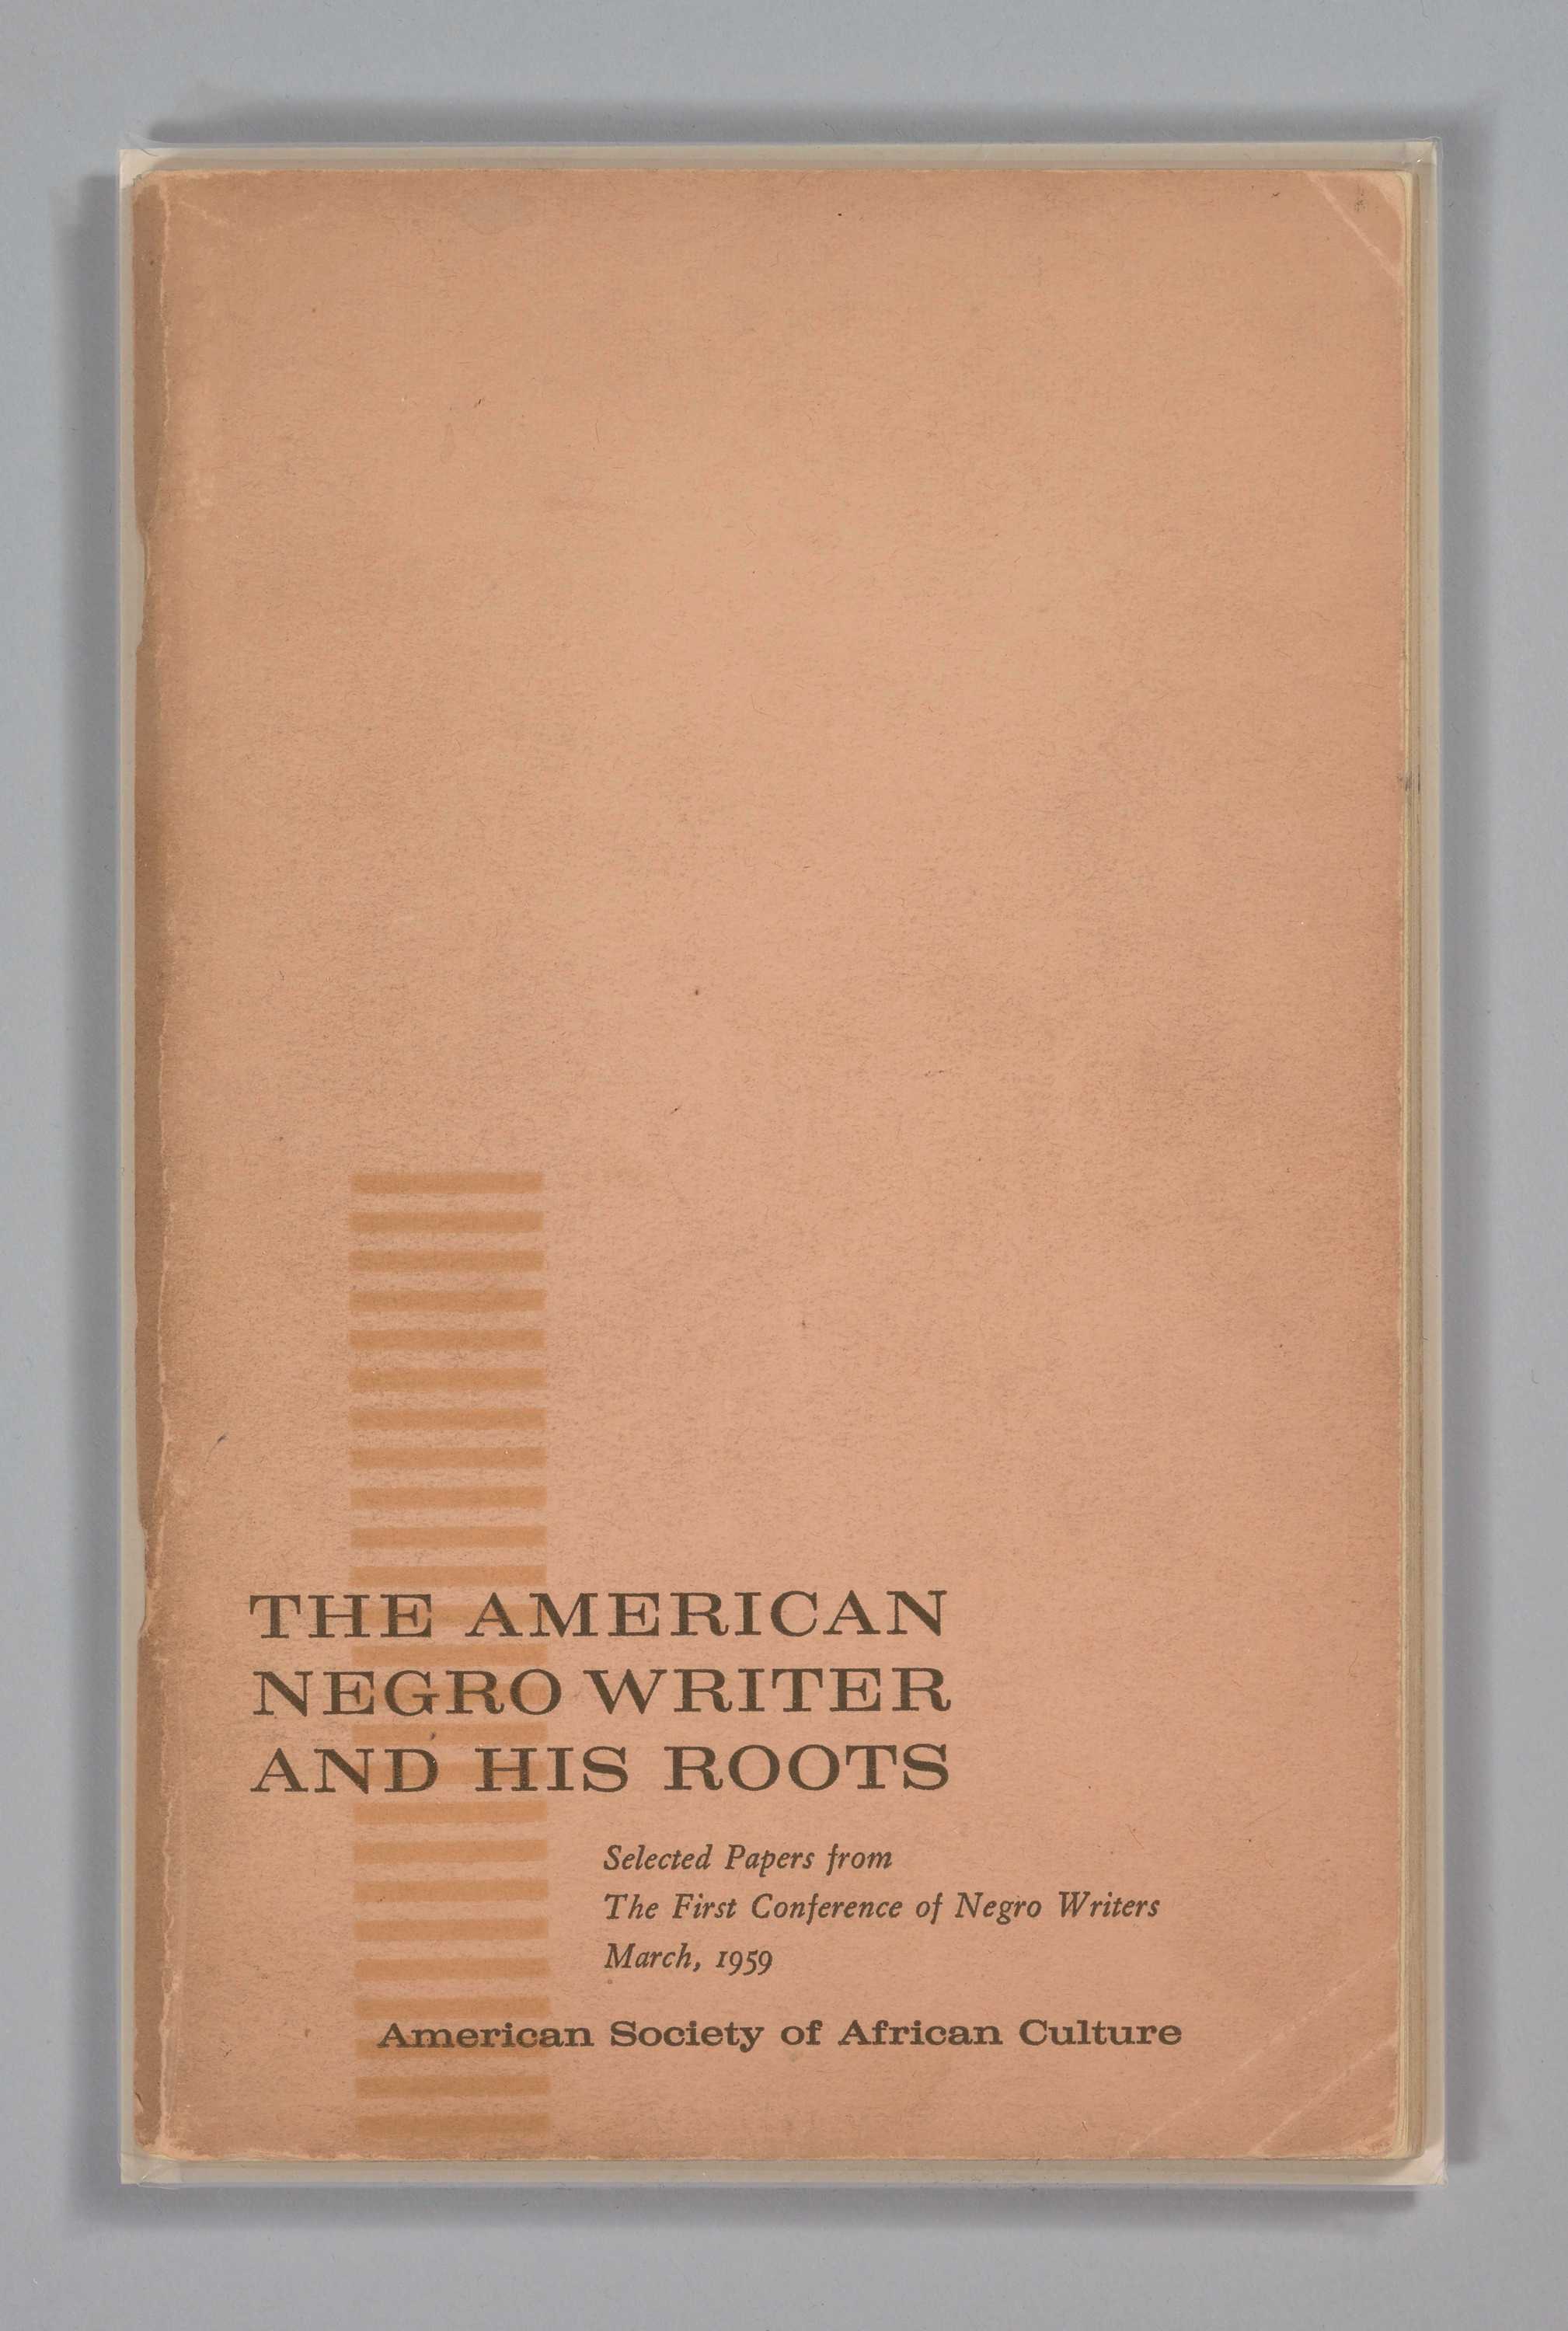 Image of a 72-page pamphlet entitled The American Negro Writer and His Roots.